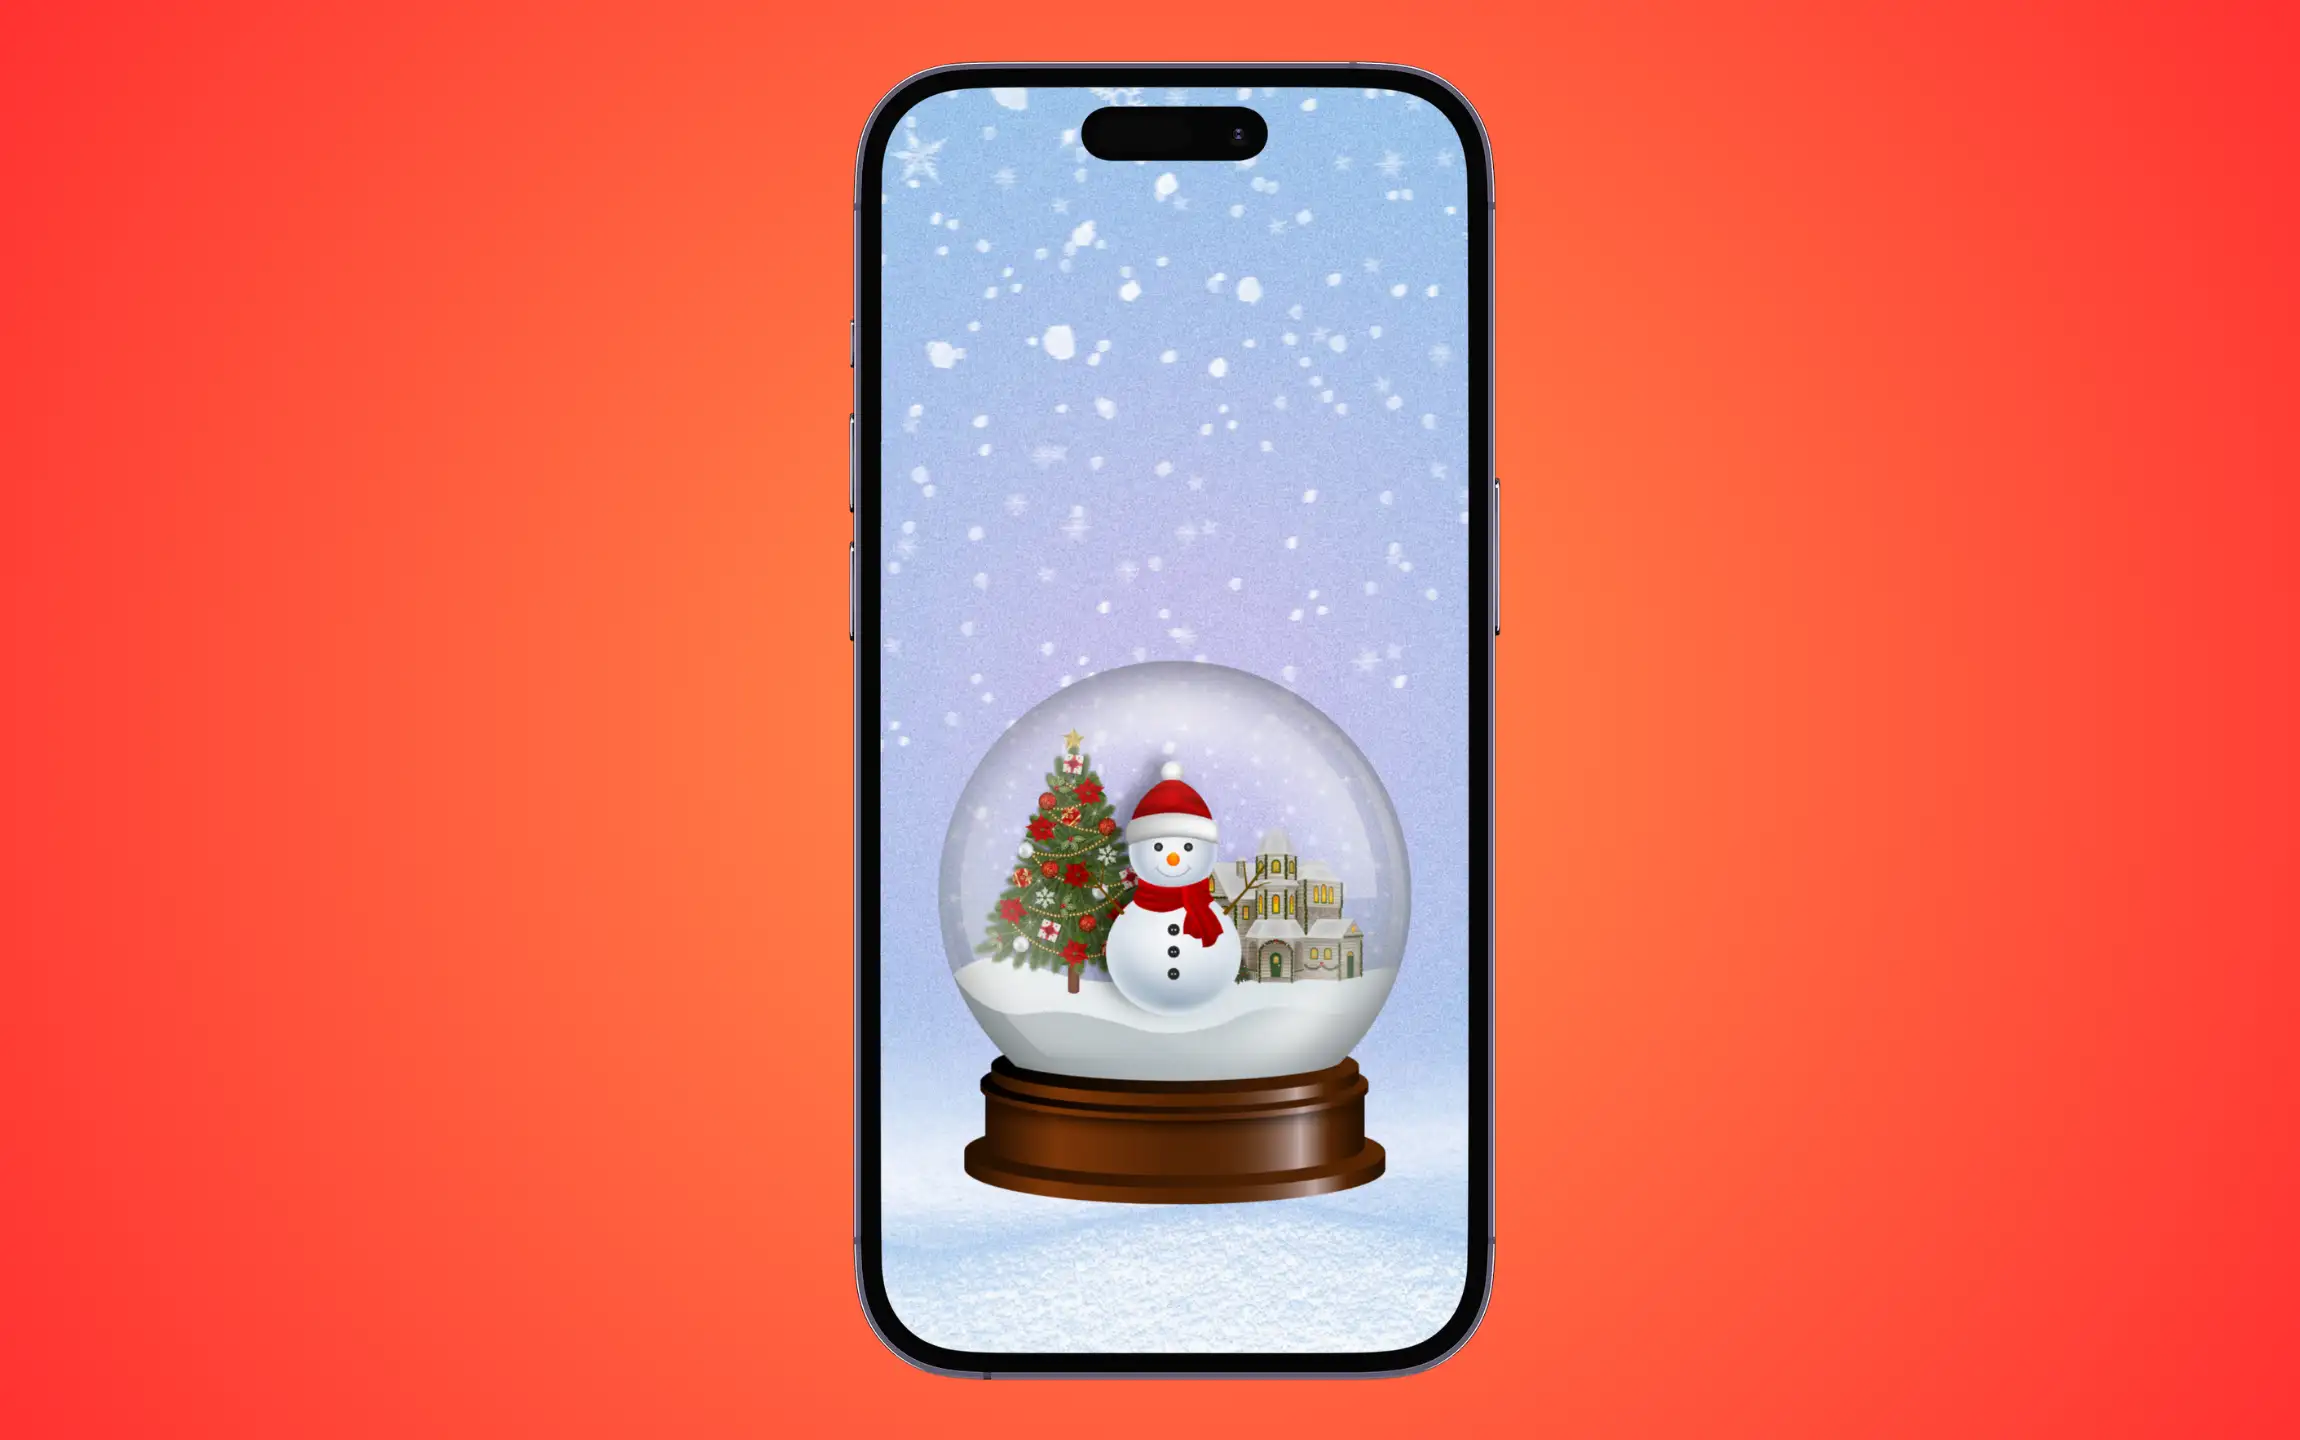 Merry christmas snow globe wallpaper for iPhone